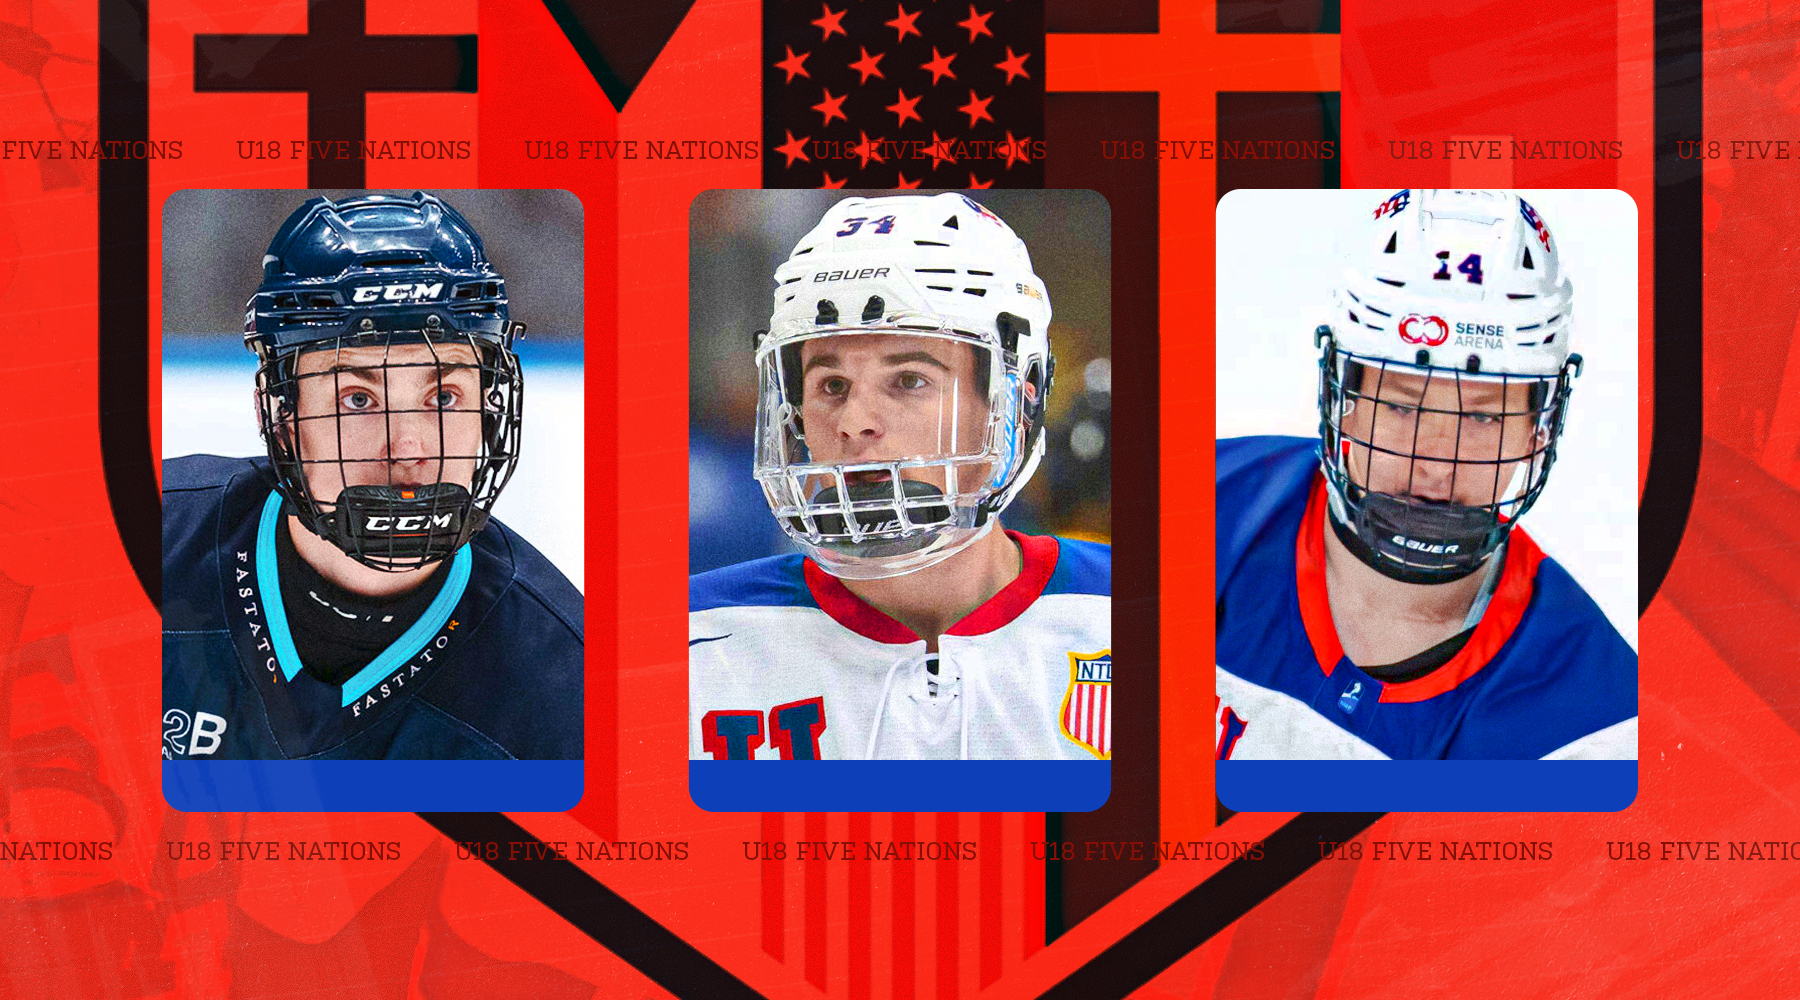 Standout performances from the 2023 U18 5 Nations tournament